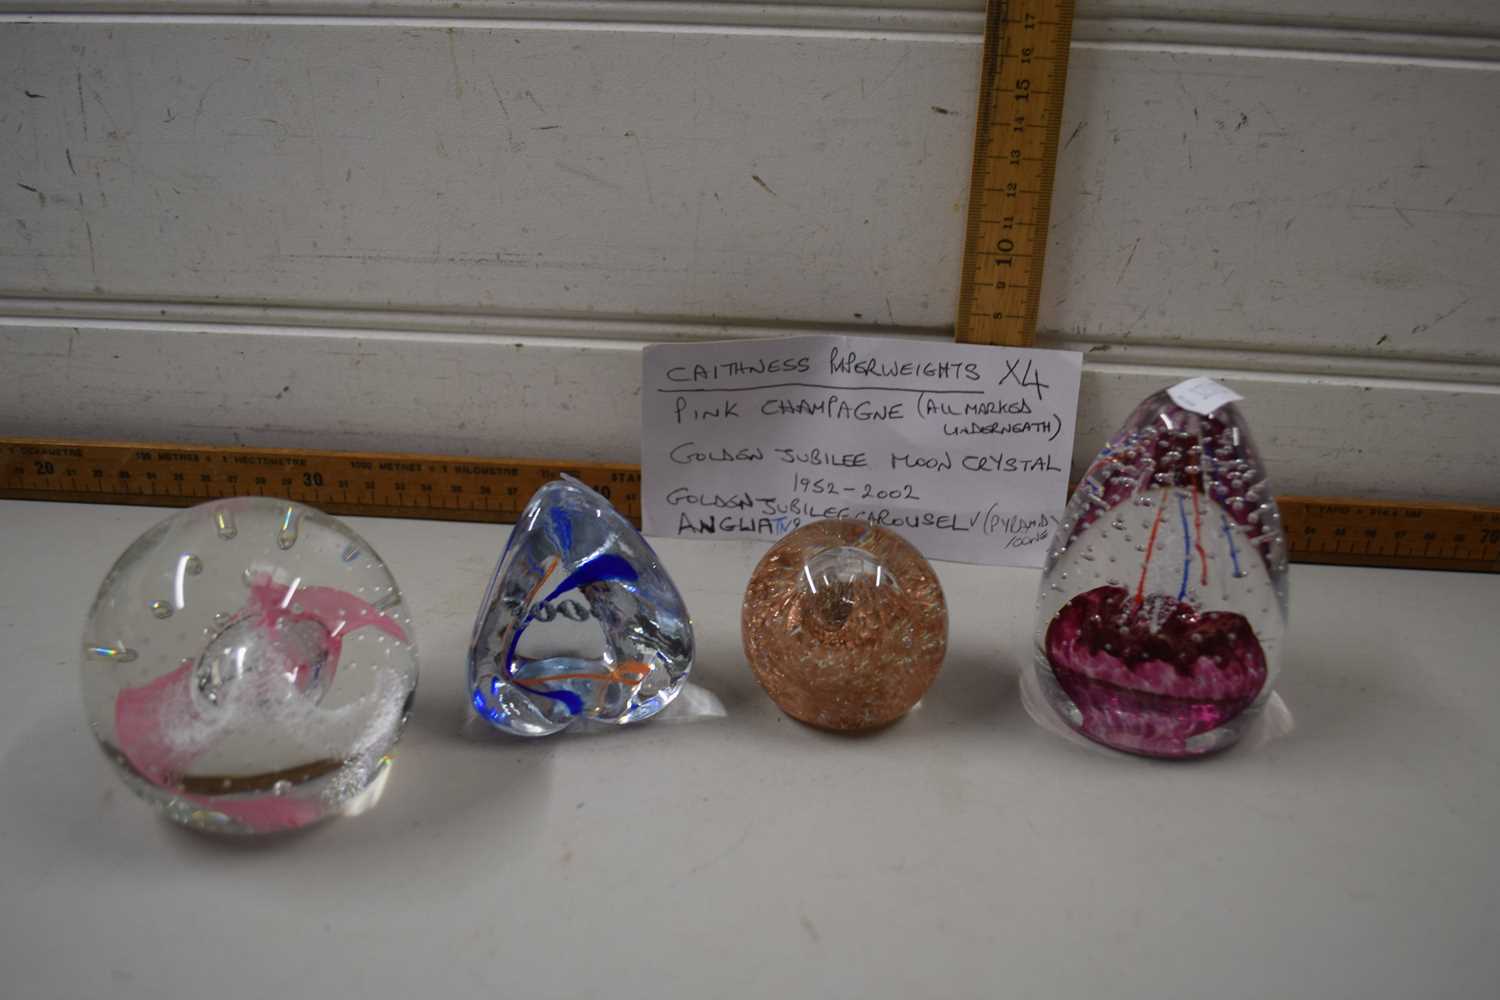 Four Caithness paperweights, Pink Champagne, Golden Jubilee Moon Crystal, Golden Jubilee Carousel